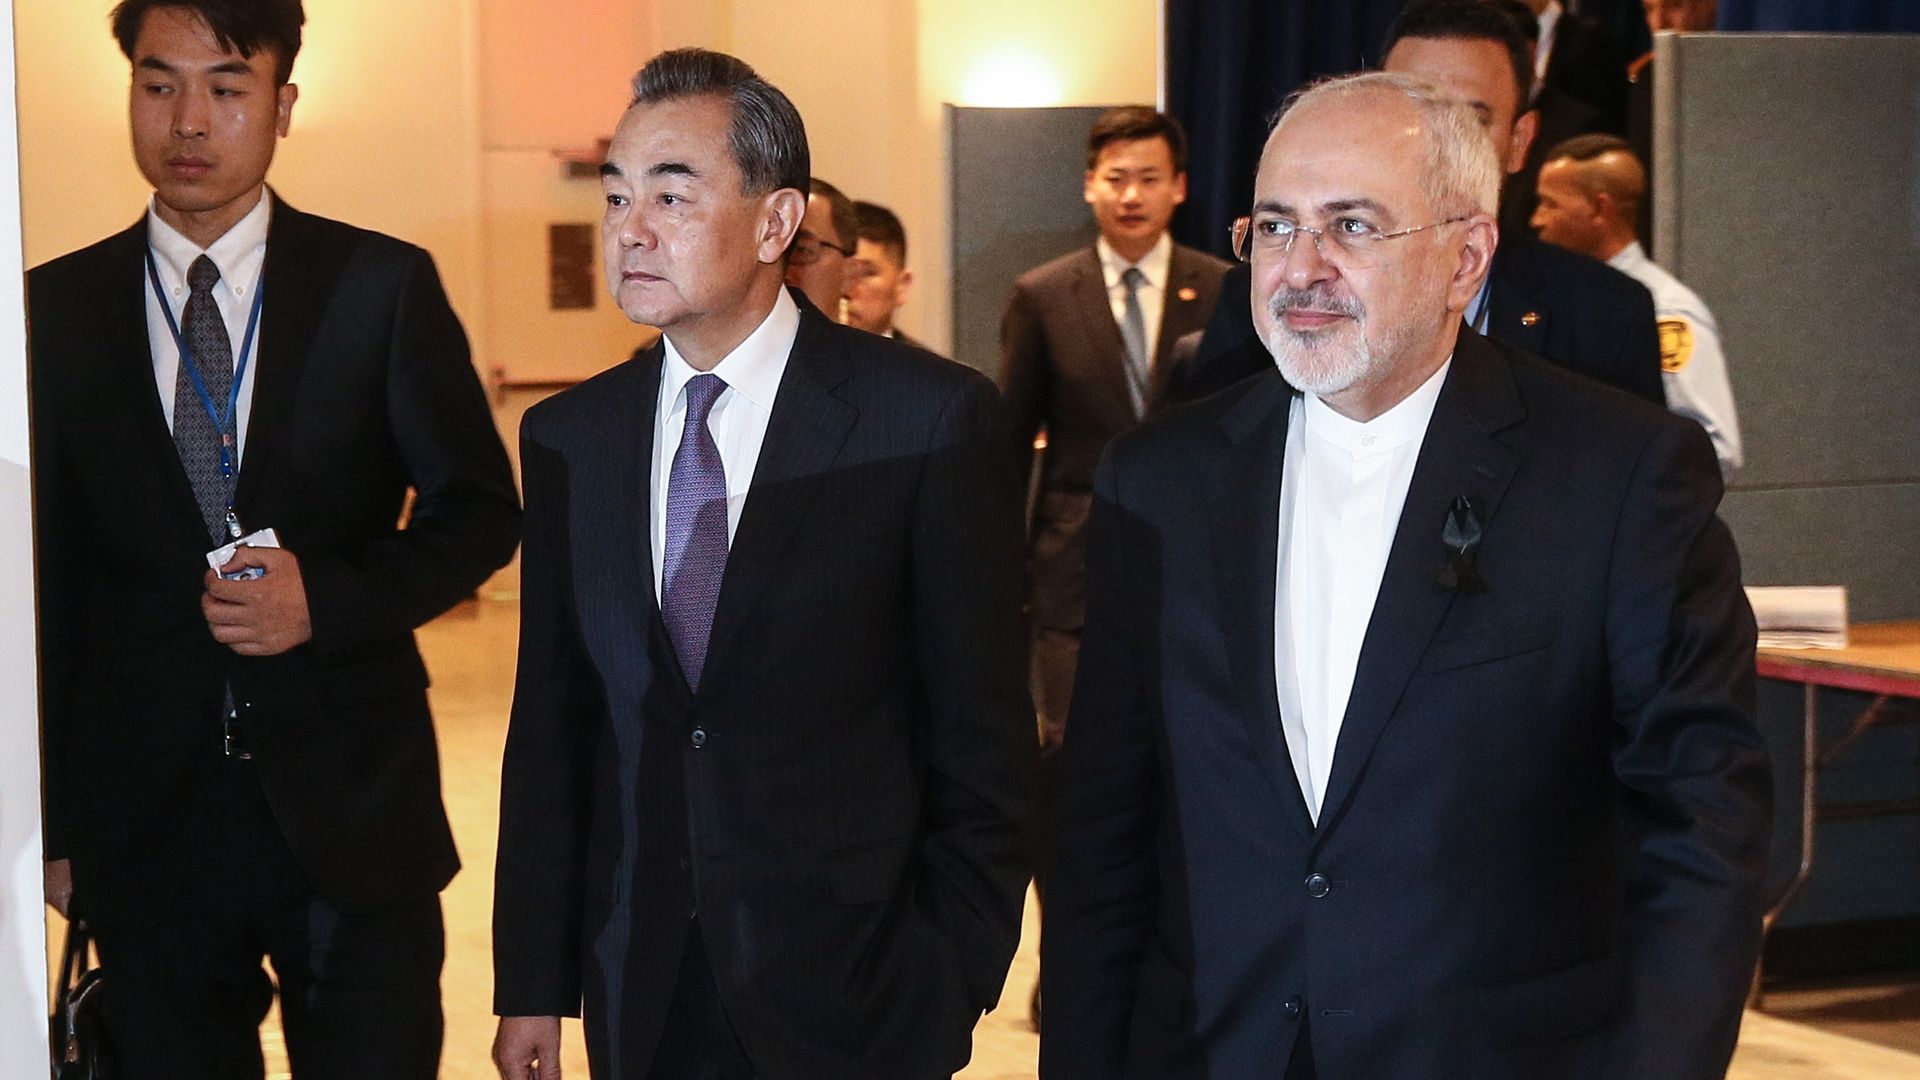 China's Foreign Minister Wang Yi and Iran's Foreign Minister Mohammad Javad Zarif walking